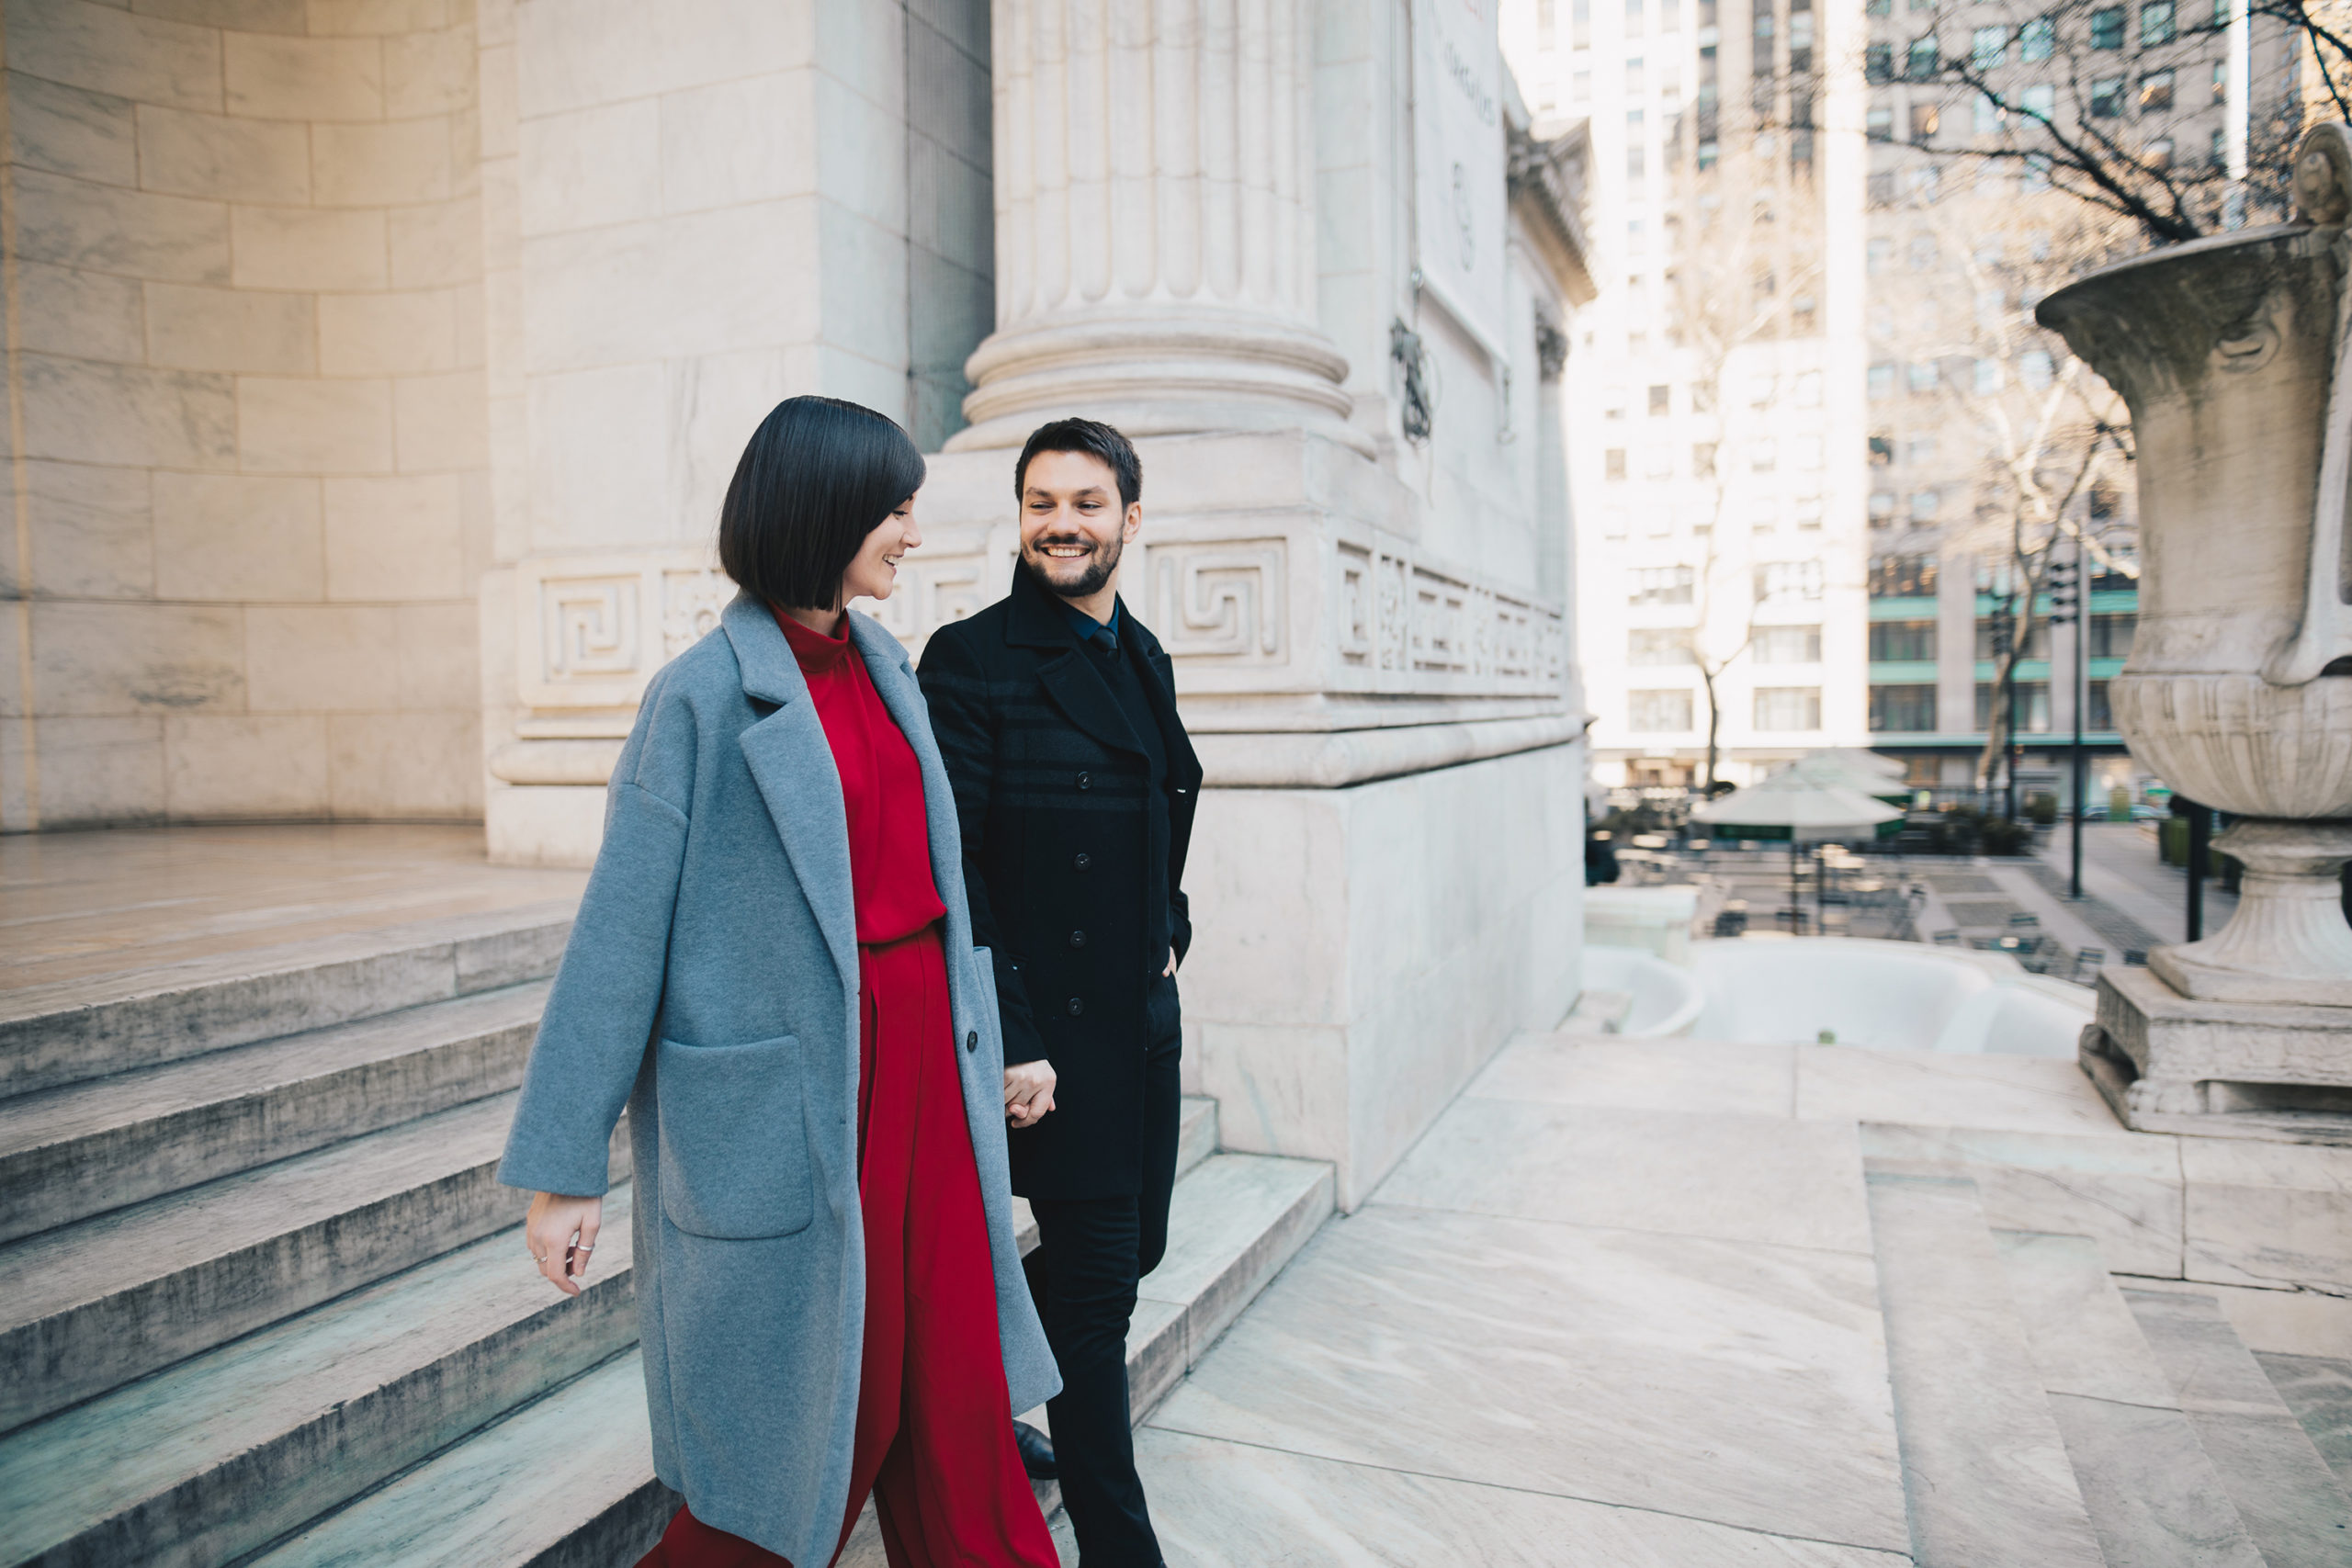 Fun and candid Times Square Engagement Photos and Grand Central Engagement Photography in NYC